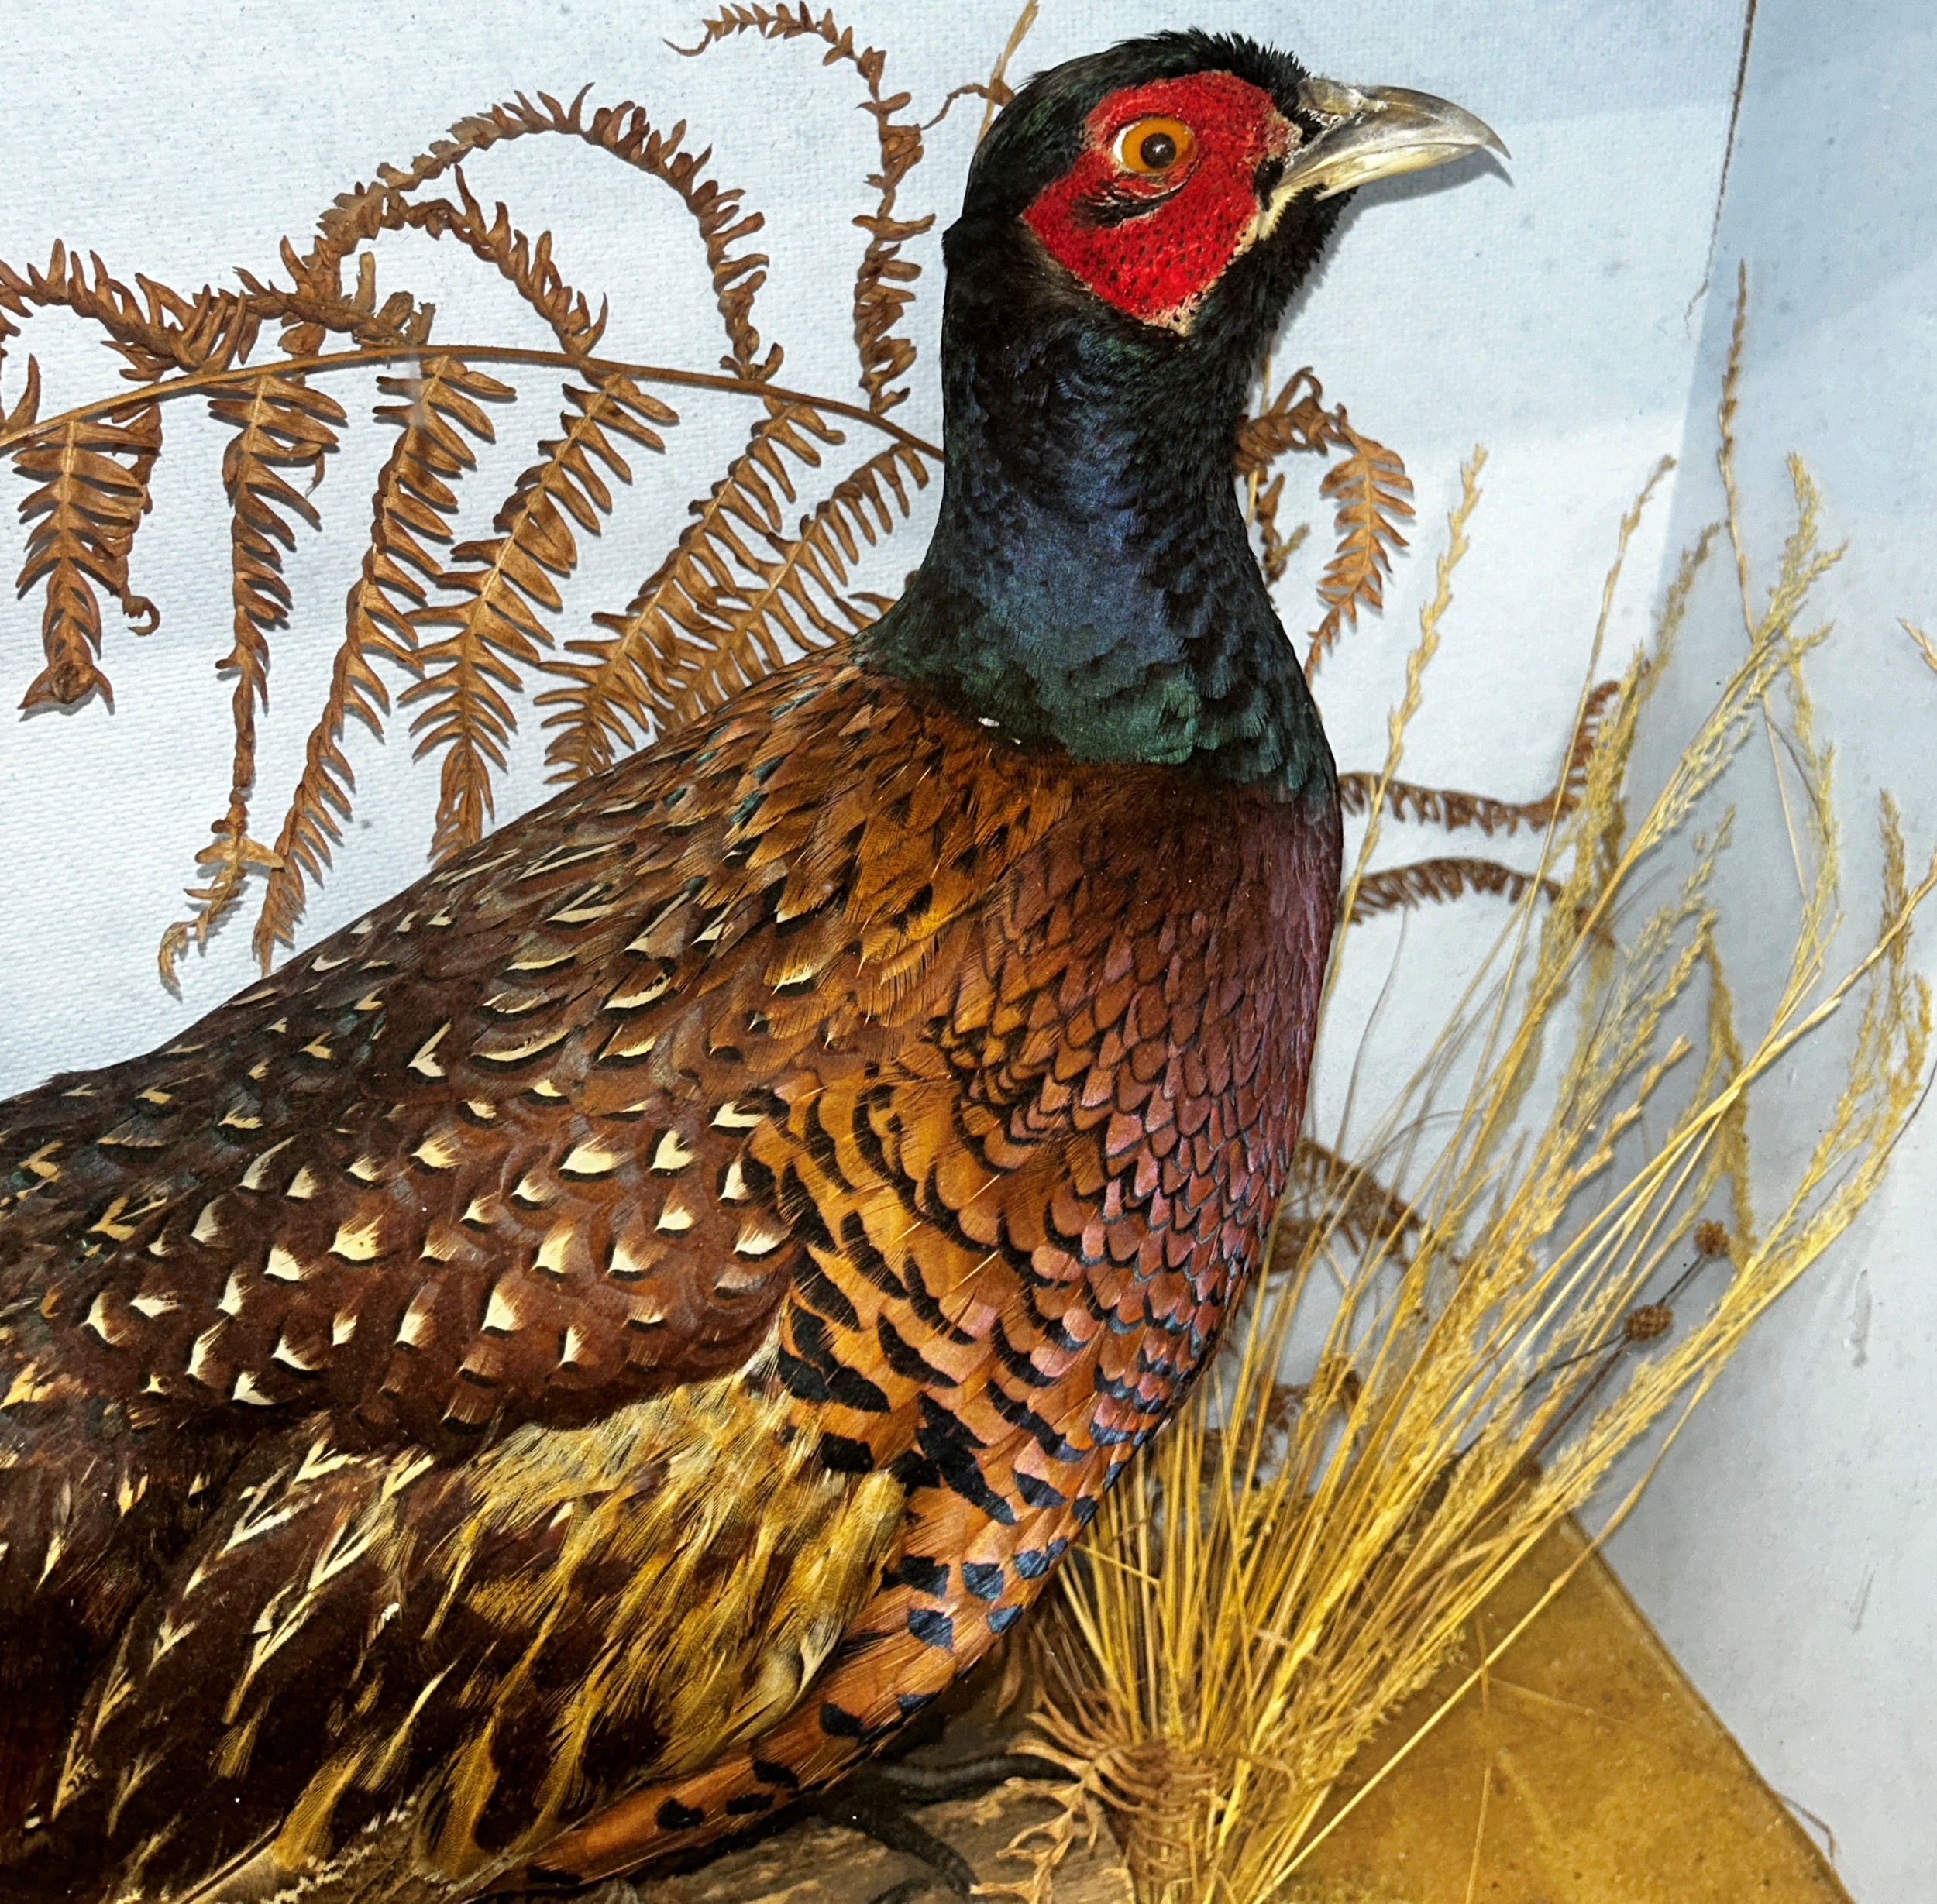 Taxidermy interest - Pheasant in naturalist setting - Image 3 of 3